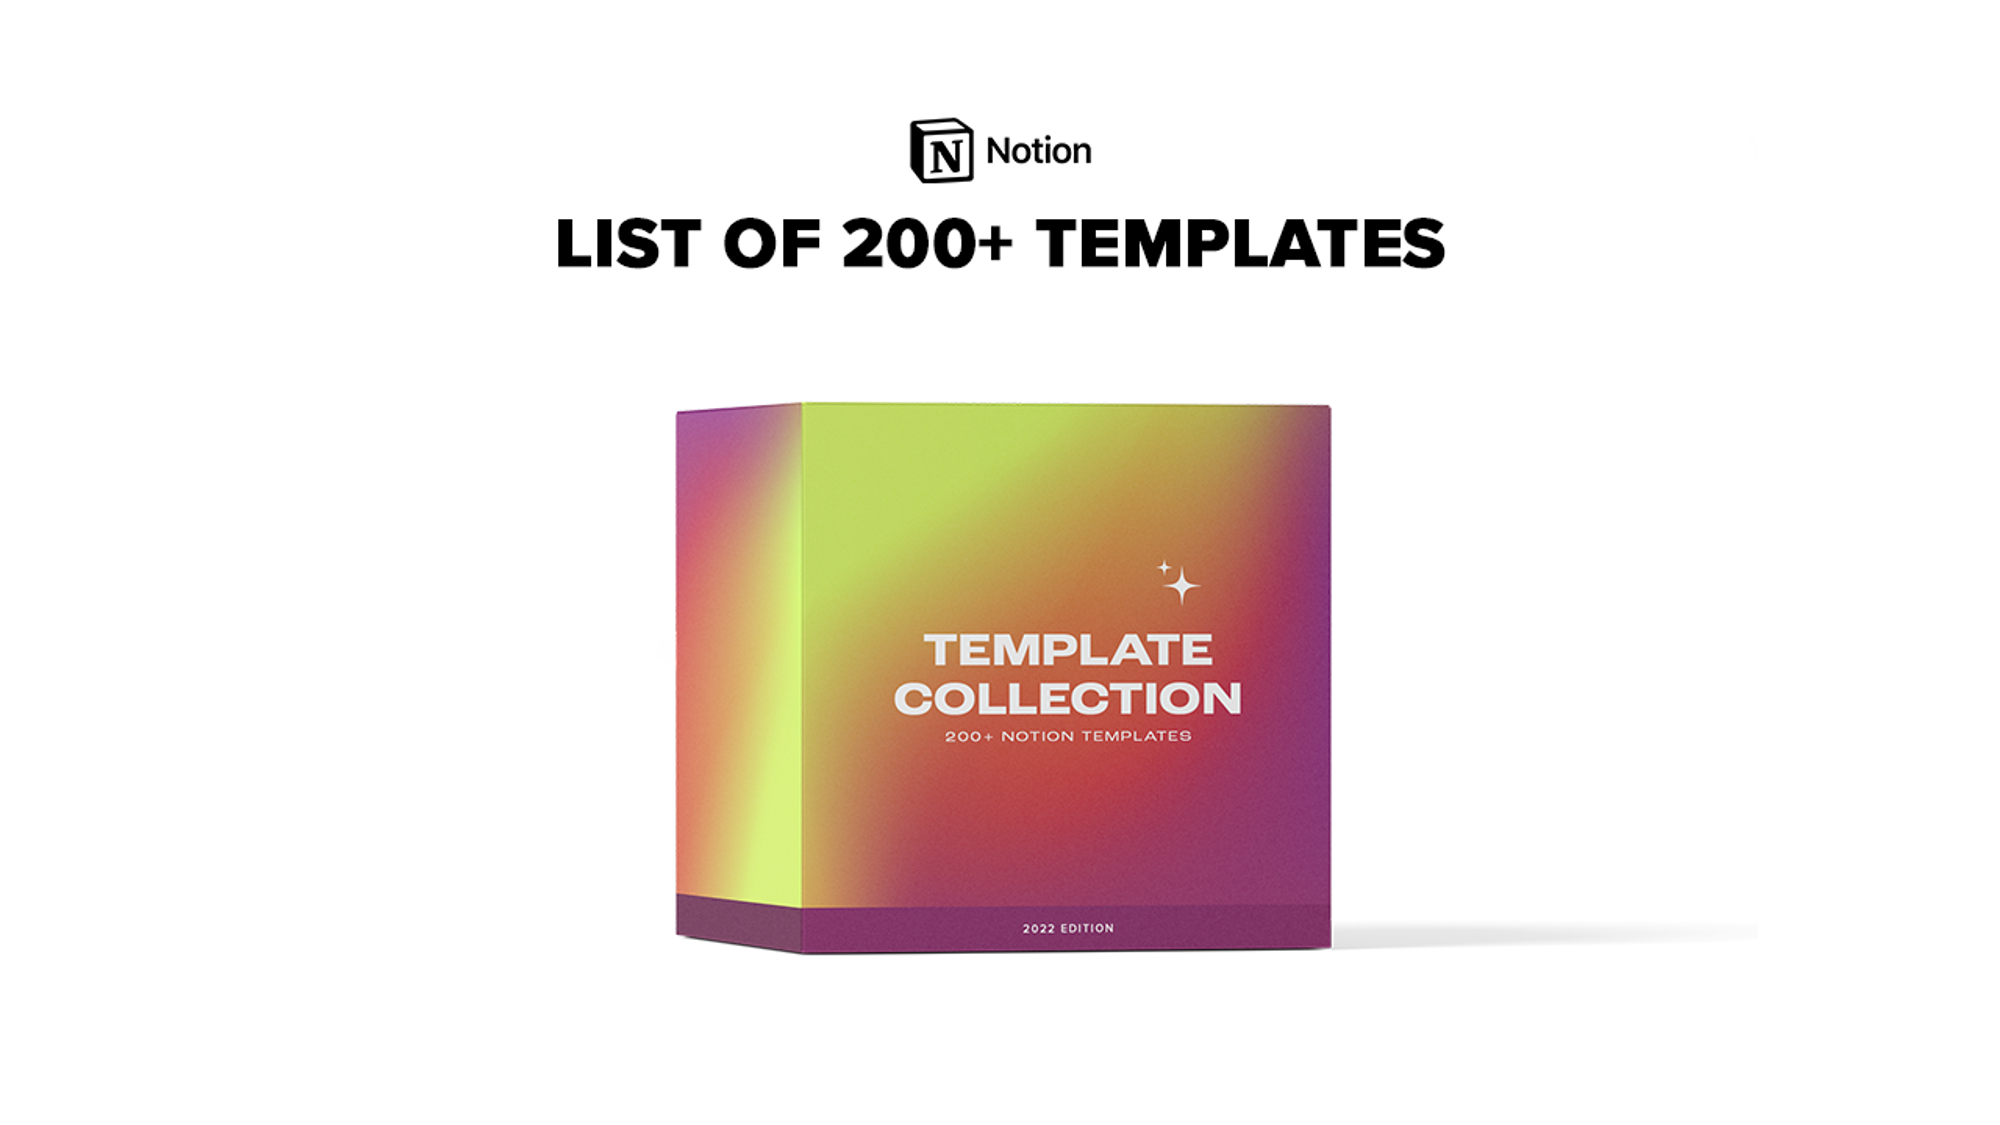 List of 200+ Notion Templates